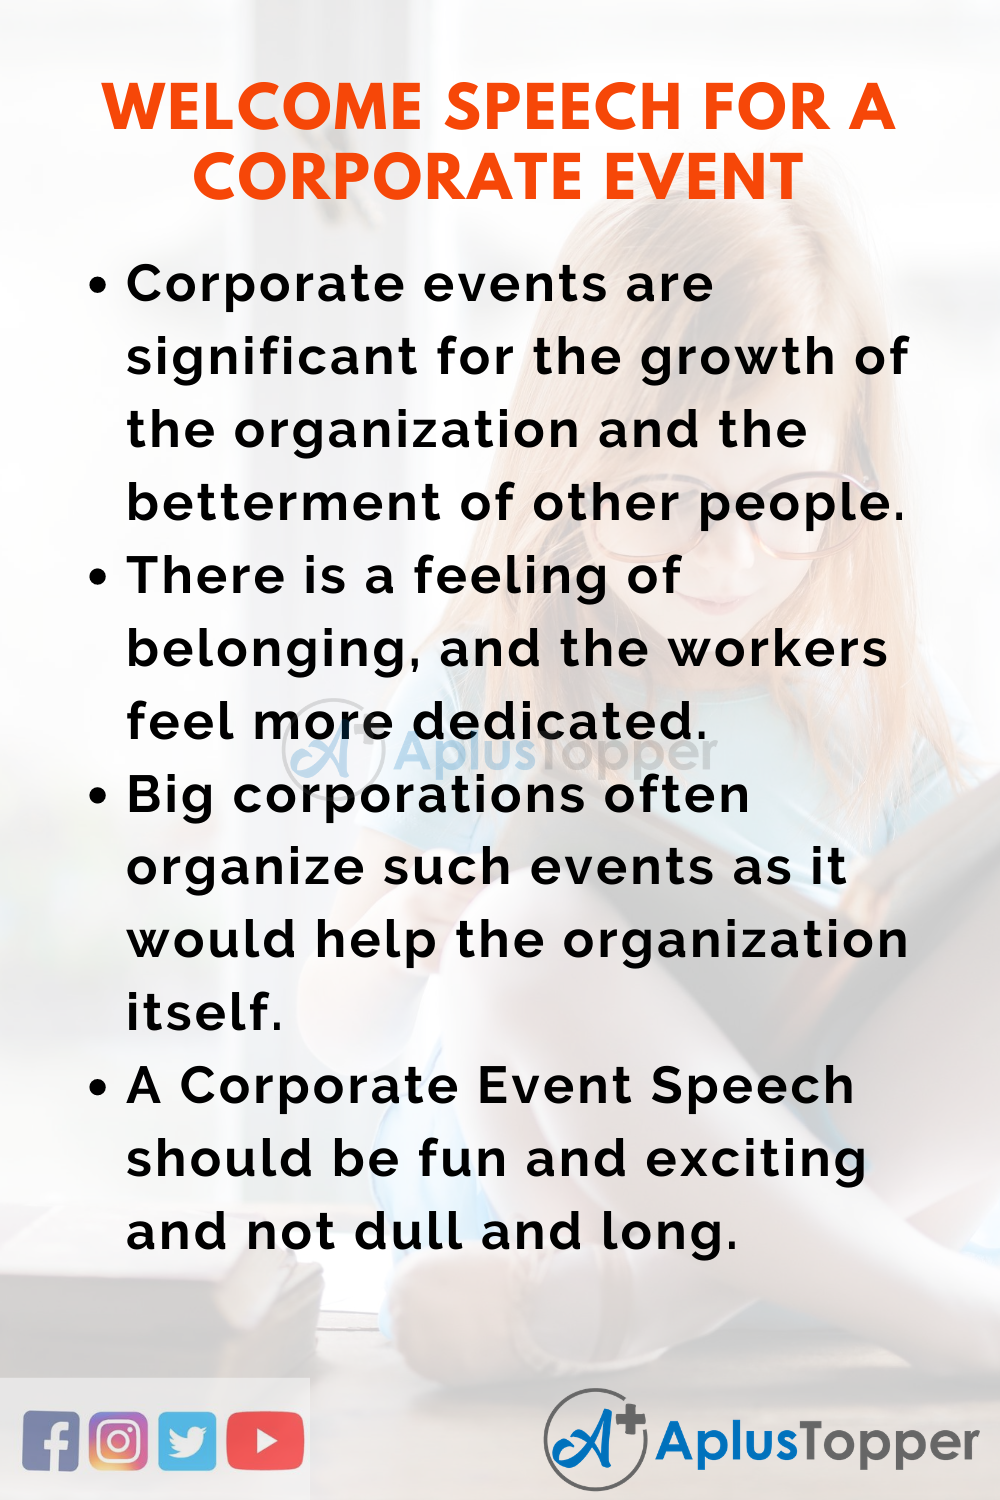 sample welcome speech for a corporate event